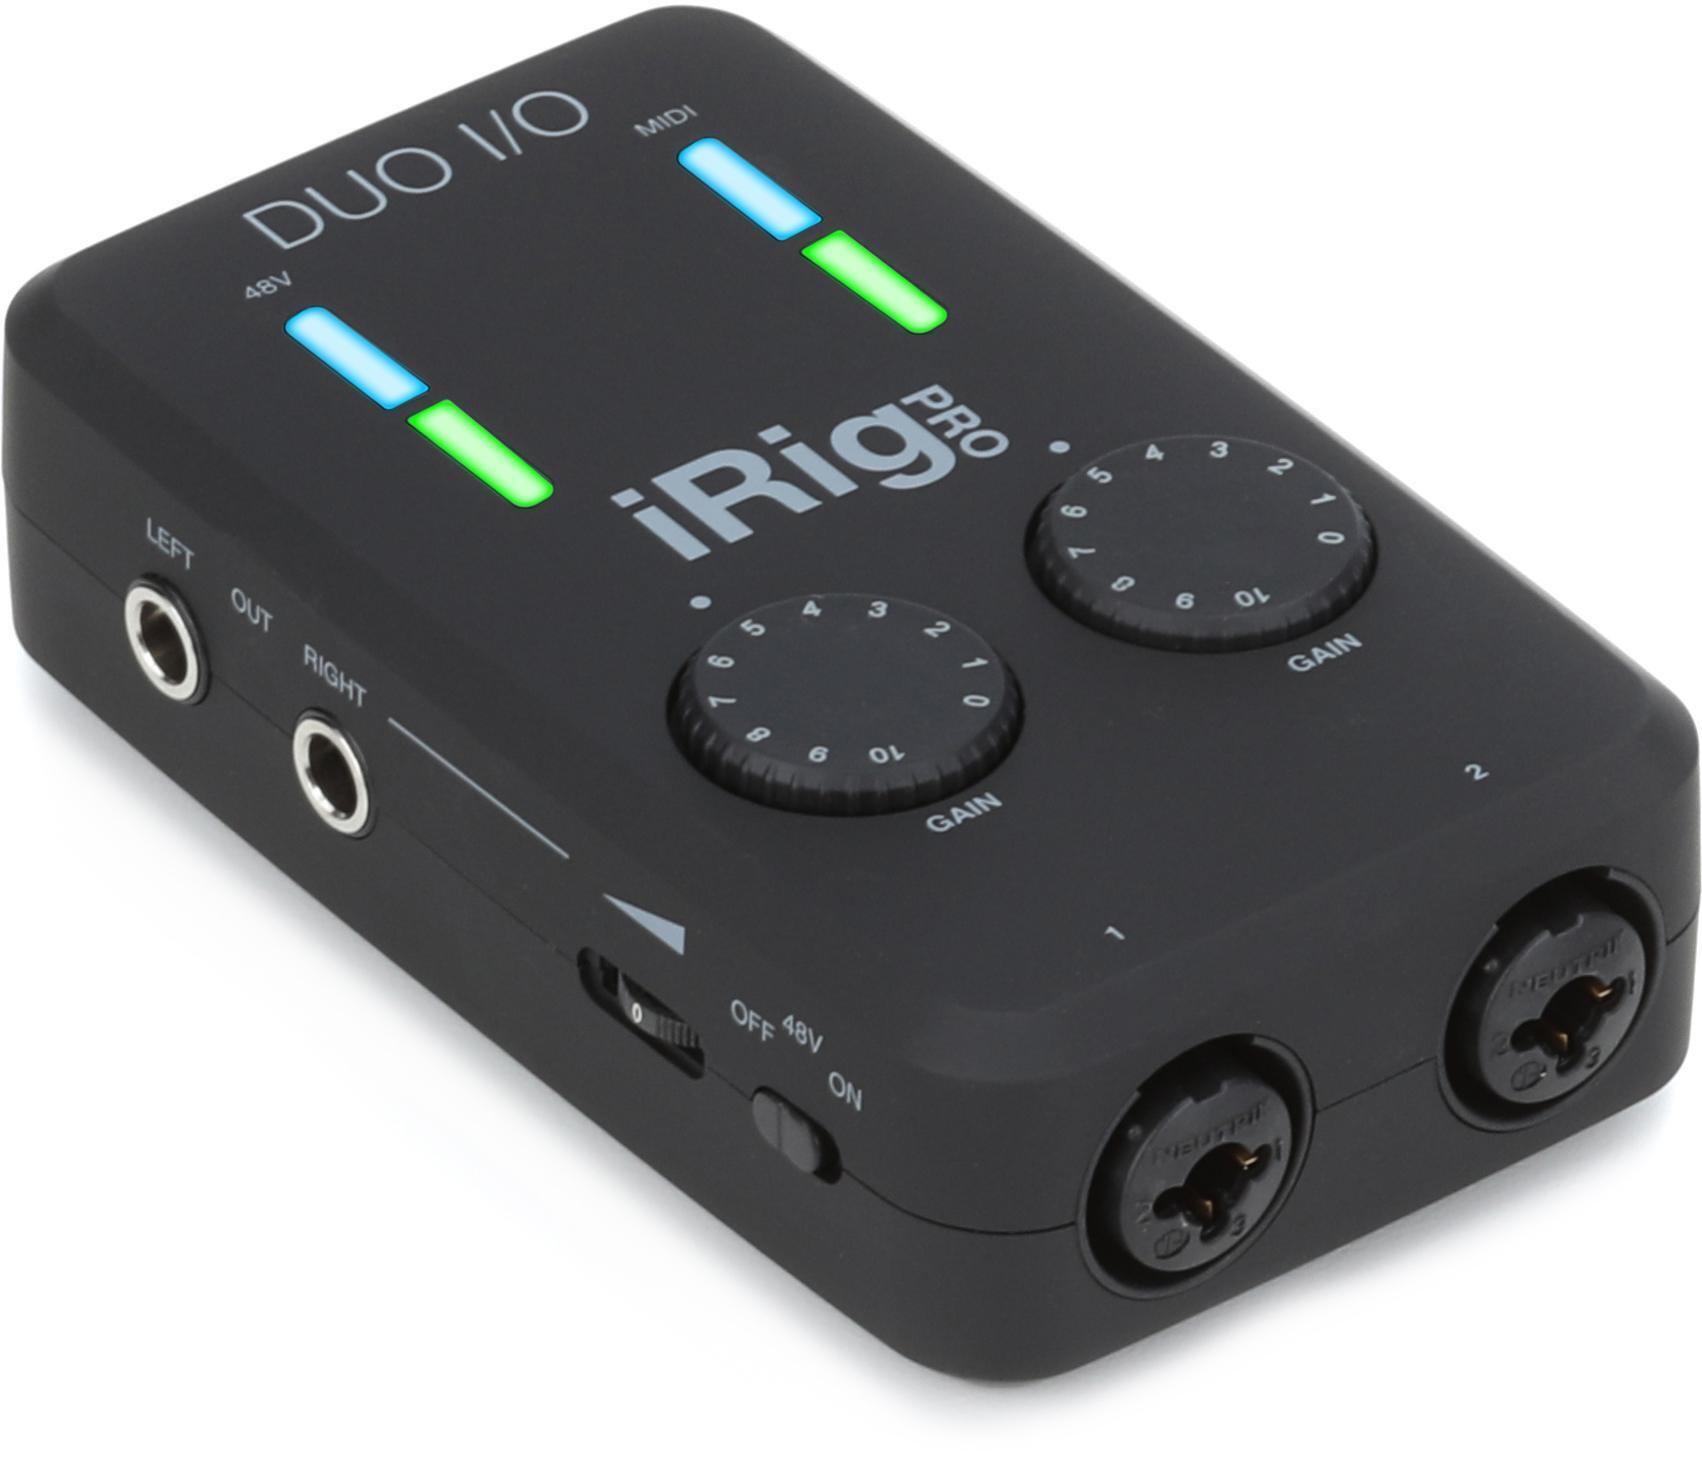 Bundled Item: IK Multimedia iRig Pro Duo I/O 2-channel Audio/MIDI Interface for iOS, Android, and Mac/PC